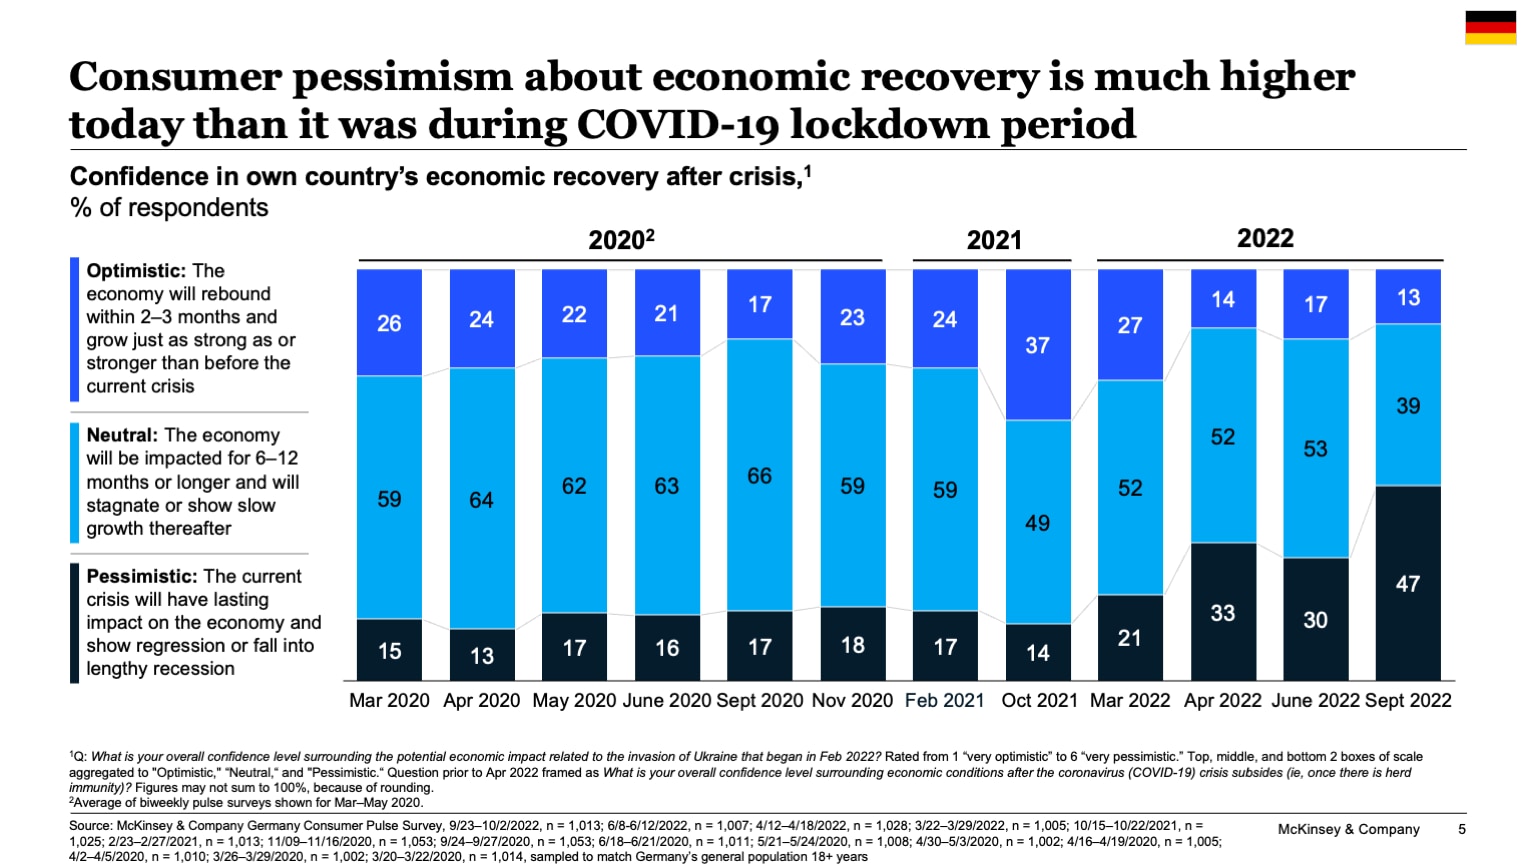 Consumer pessimism about economic recovery is much higher today than it was during COVID-19 lockdown period